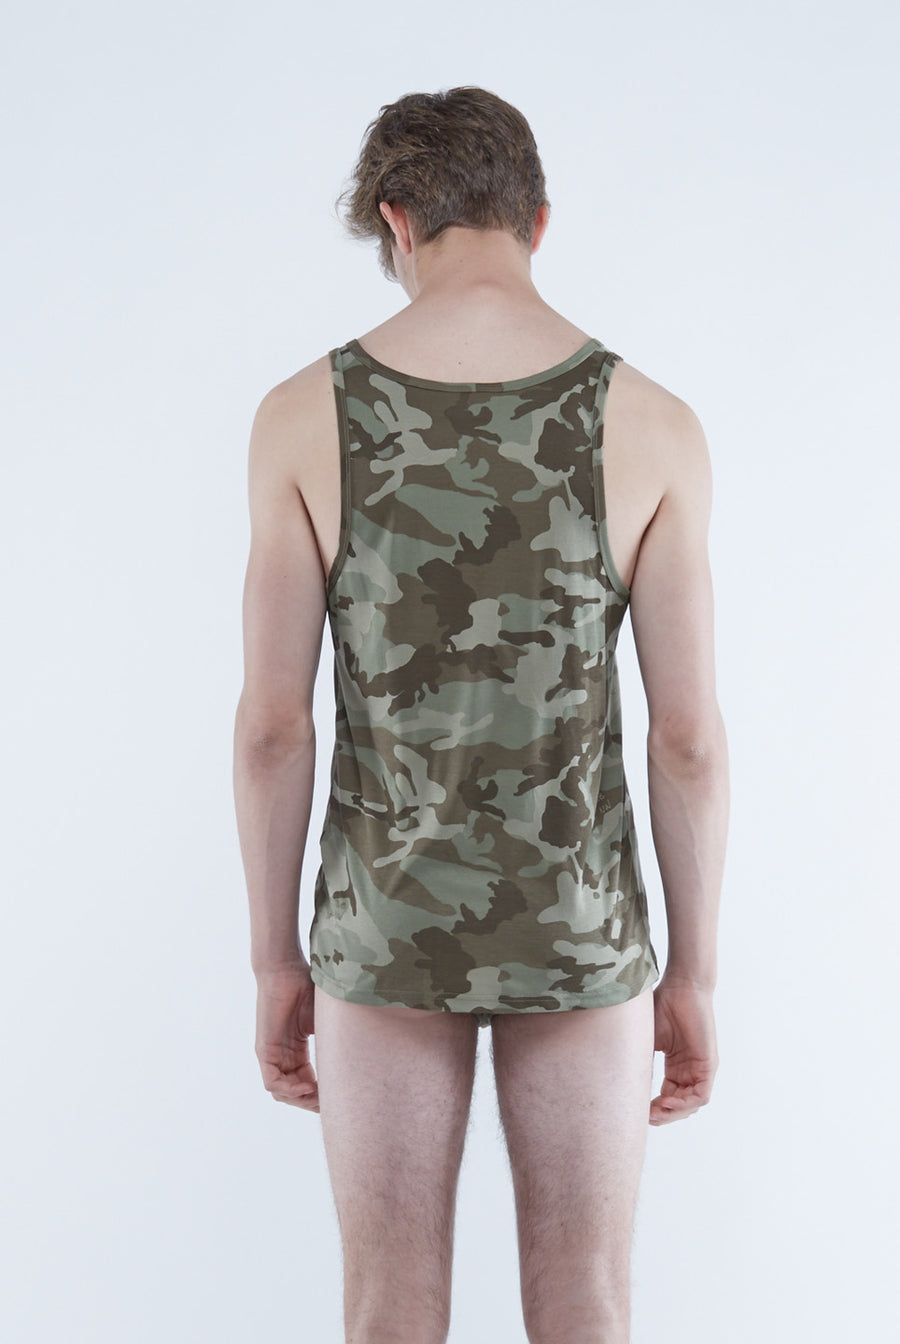 100% organic cotton men's camouflague printed singlet by Nick Wooster